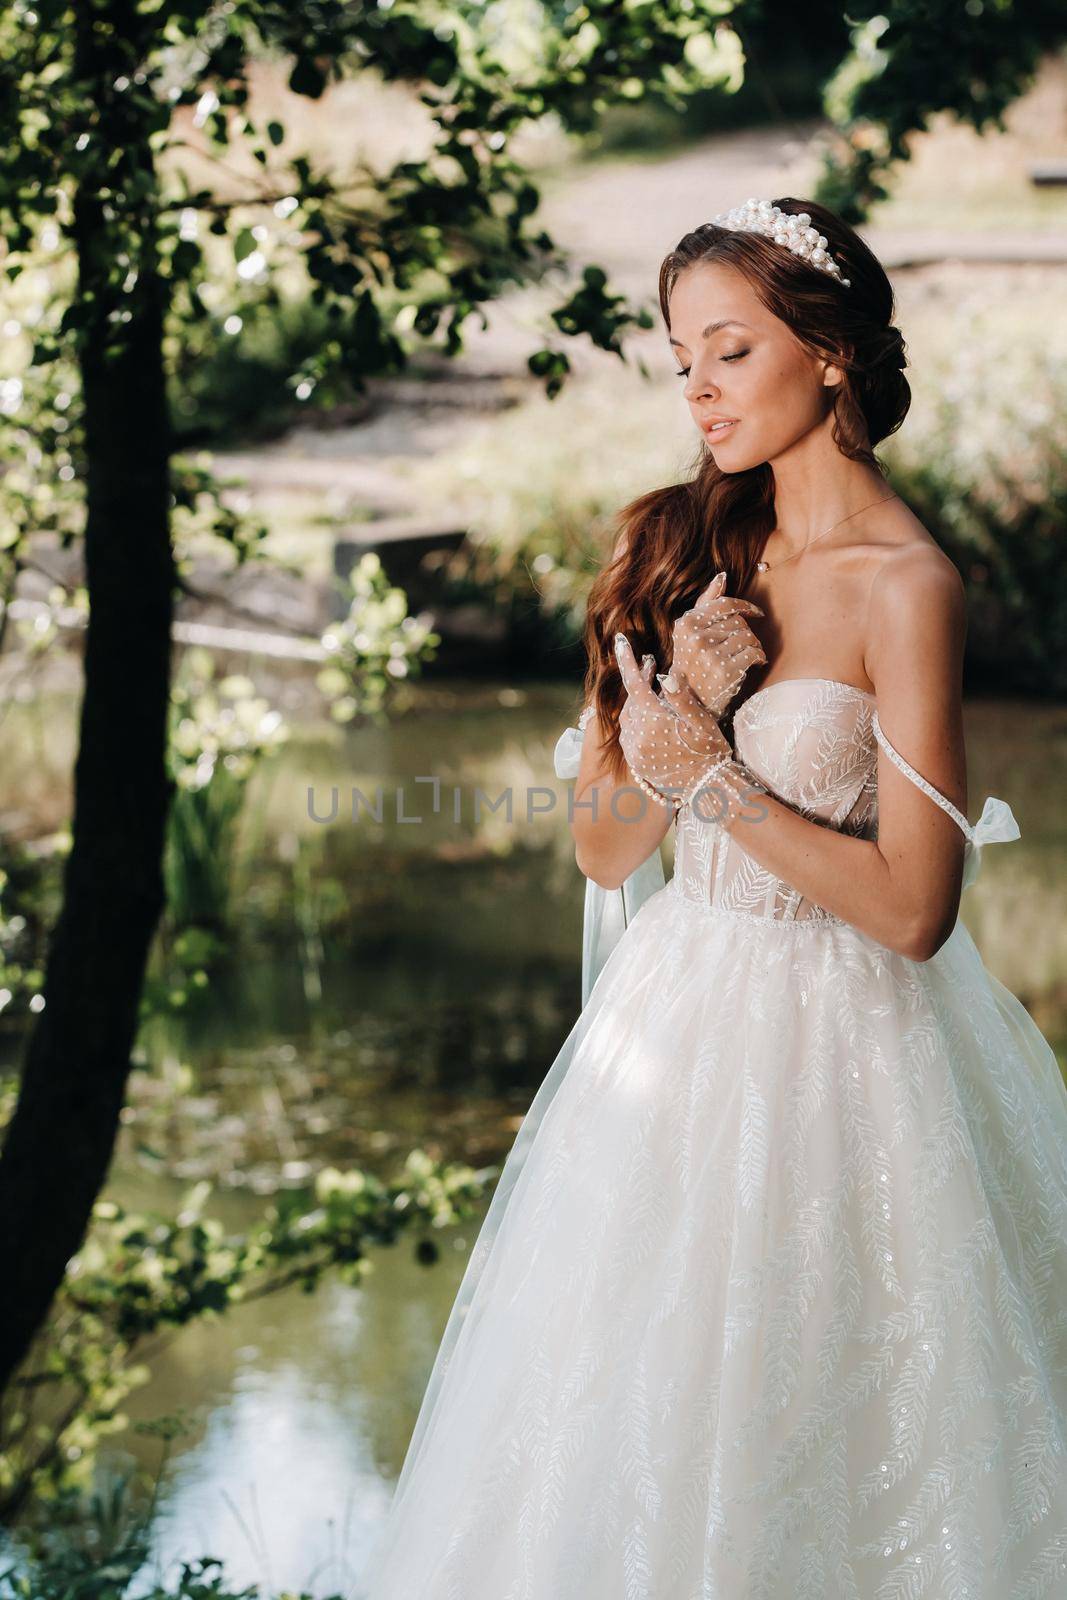 An elegant bride in a white dress, gloves with a bouquet on a waterfall in the Park, enjoying nature.Model in a wedding dress and gloves in the forest.Belarus by Lobachad